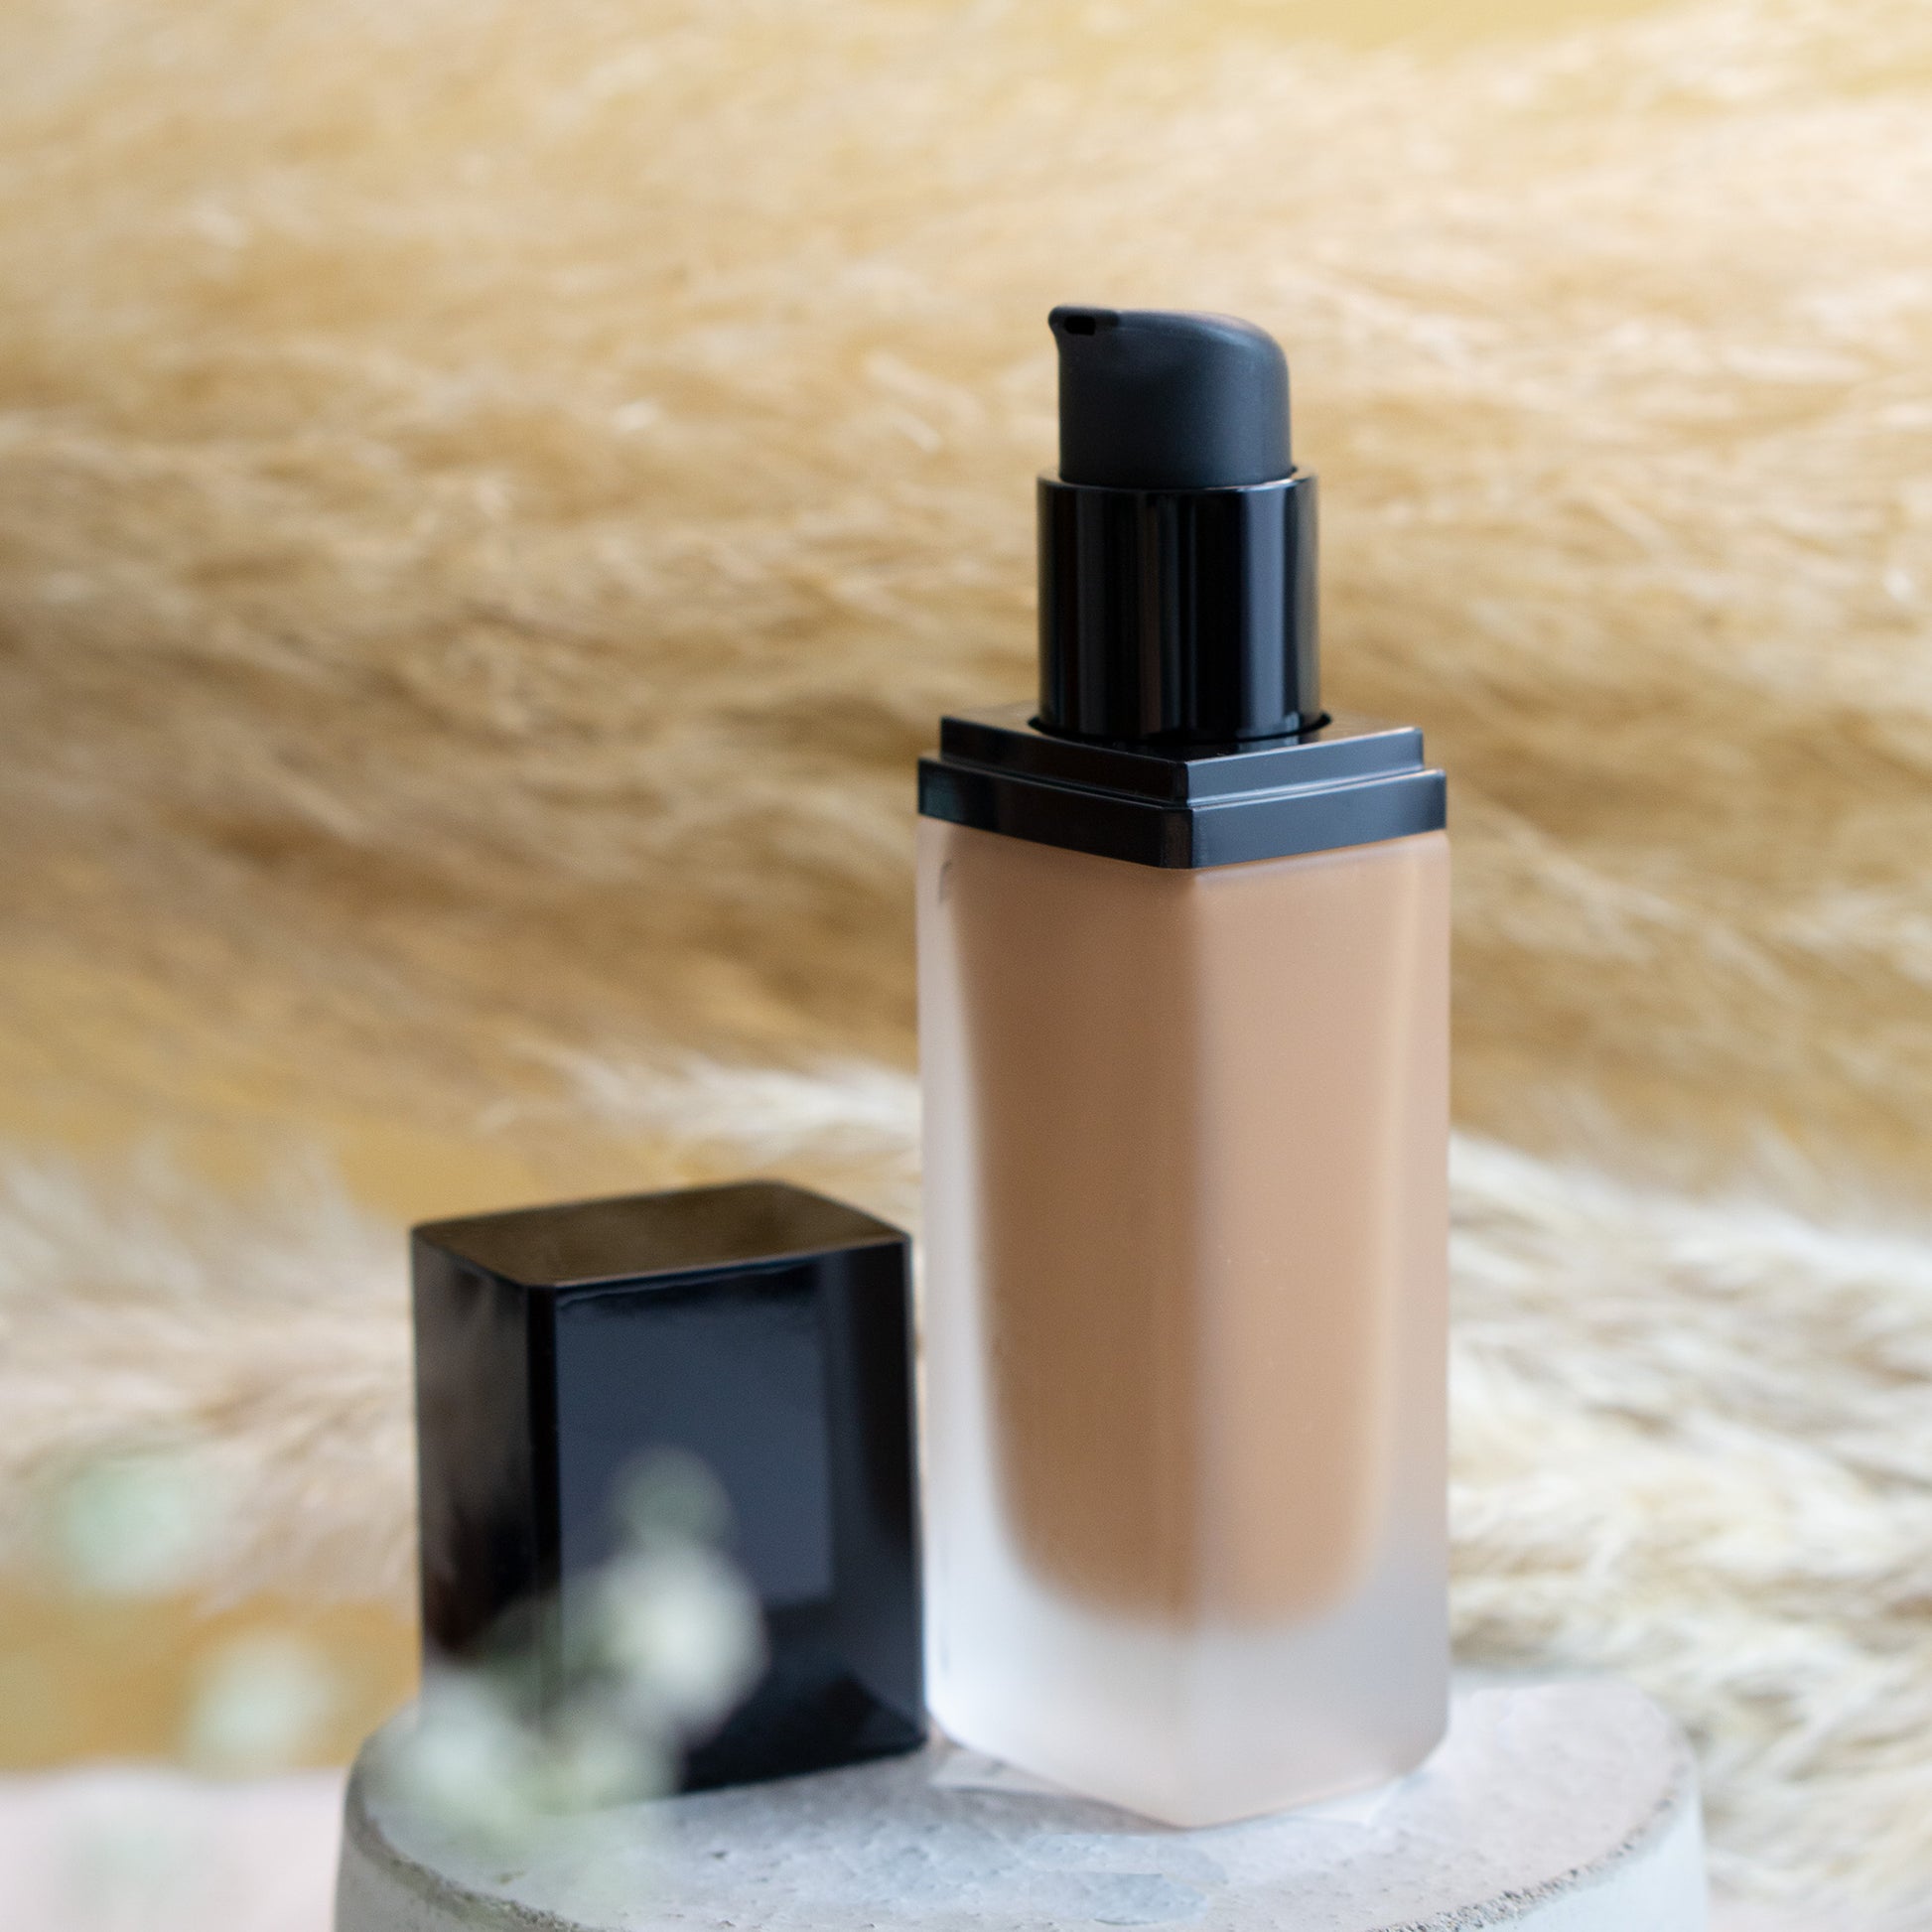 Peachy complexion with Cruisin Organics Peach Foundation and SPF. This foundation gives you a radiant, glowing look while also providing SPF 15 protection. Enjoy a natural finish with seamless blending and customize your coverage as needed. Plus, it's lightweight and suitable for all skin types.